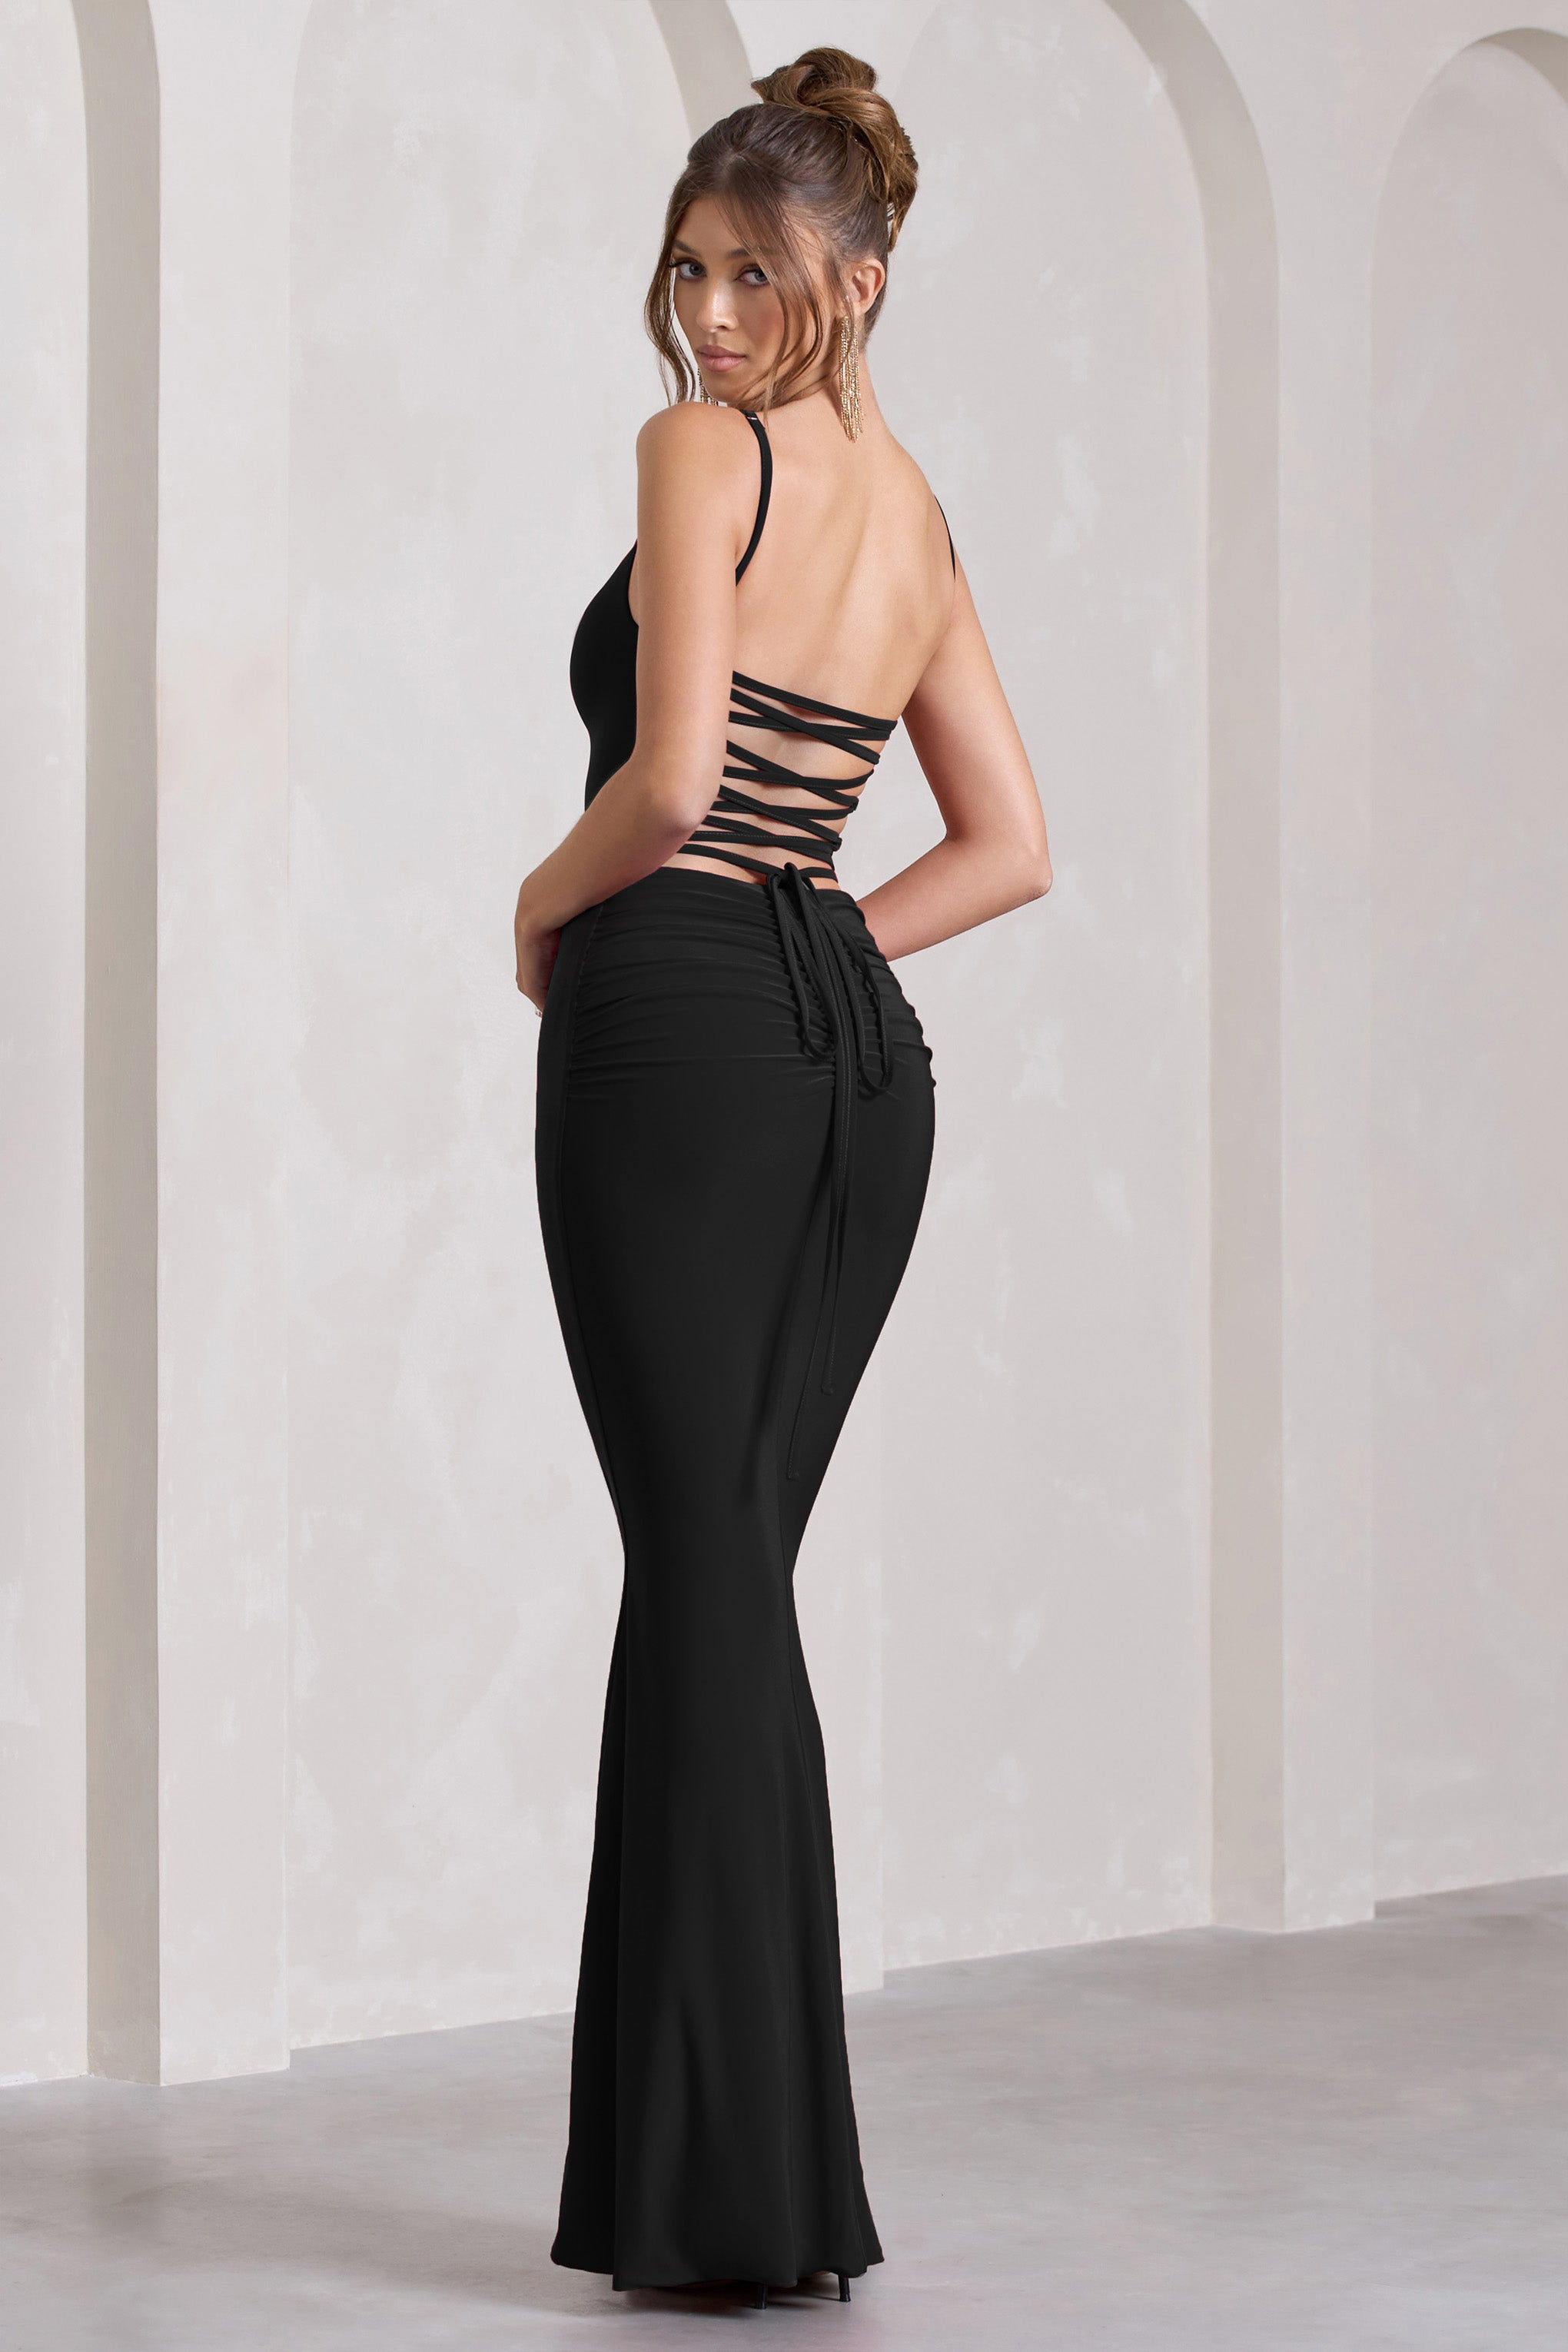 Alora Black Strappy Lace-Up Maxi Dress With Flower Corsage